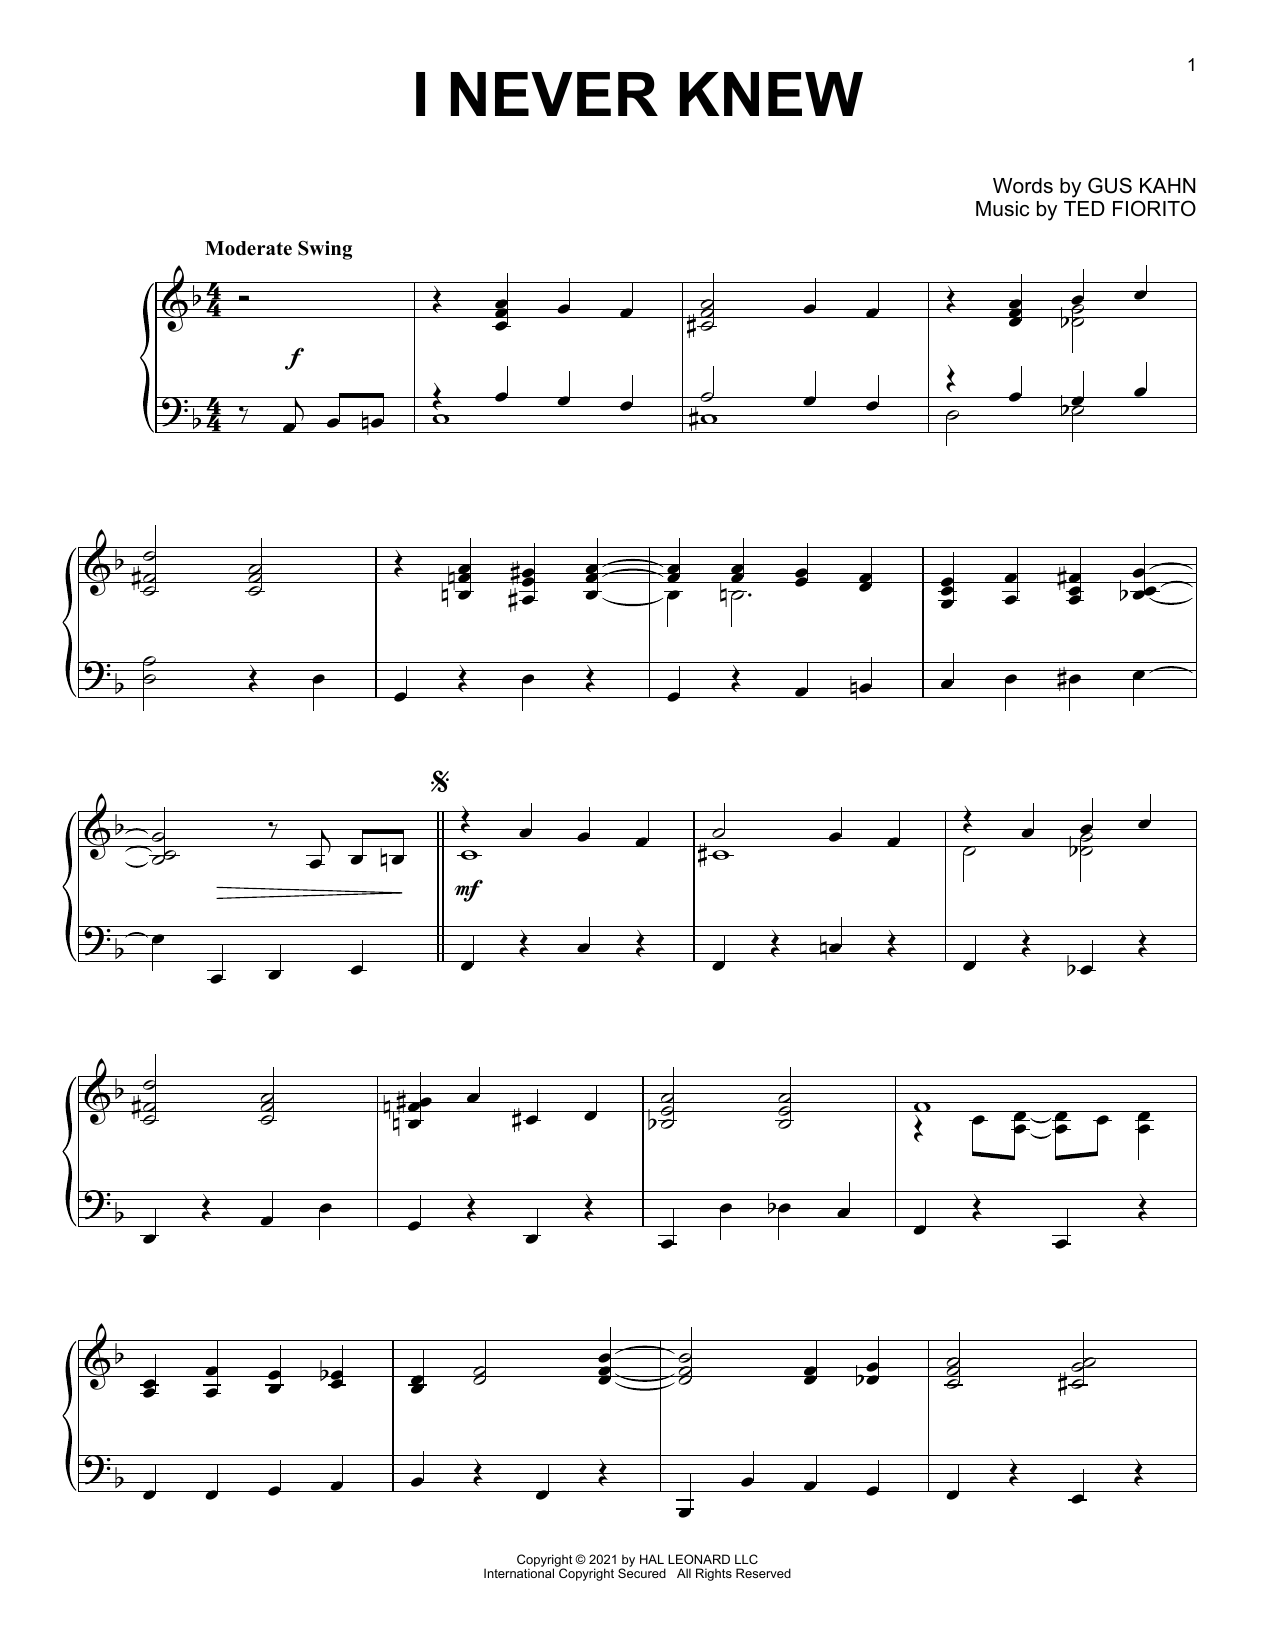 Download Gus Kahn and Ted Fiorito I Never Knew Sheet Music